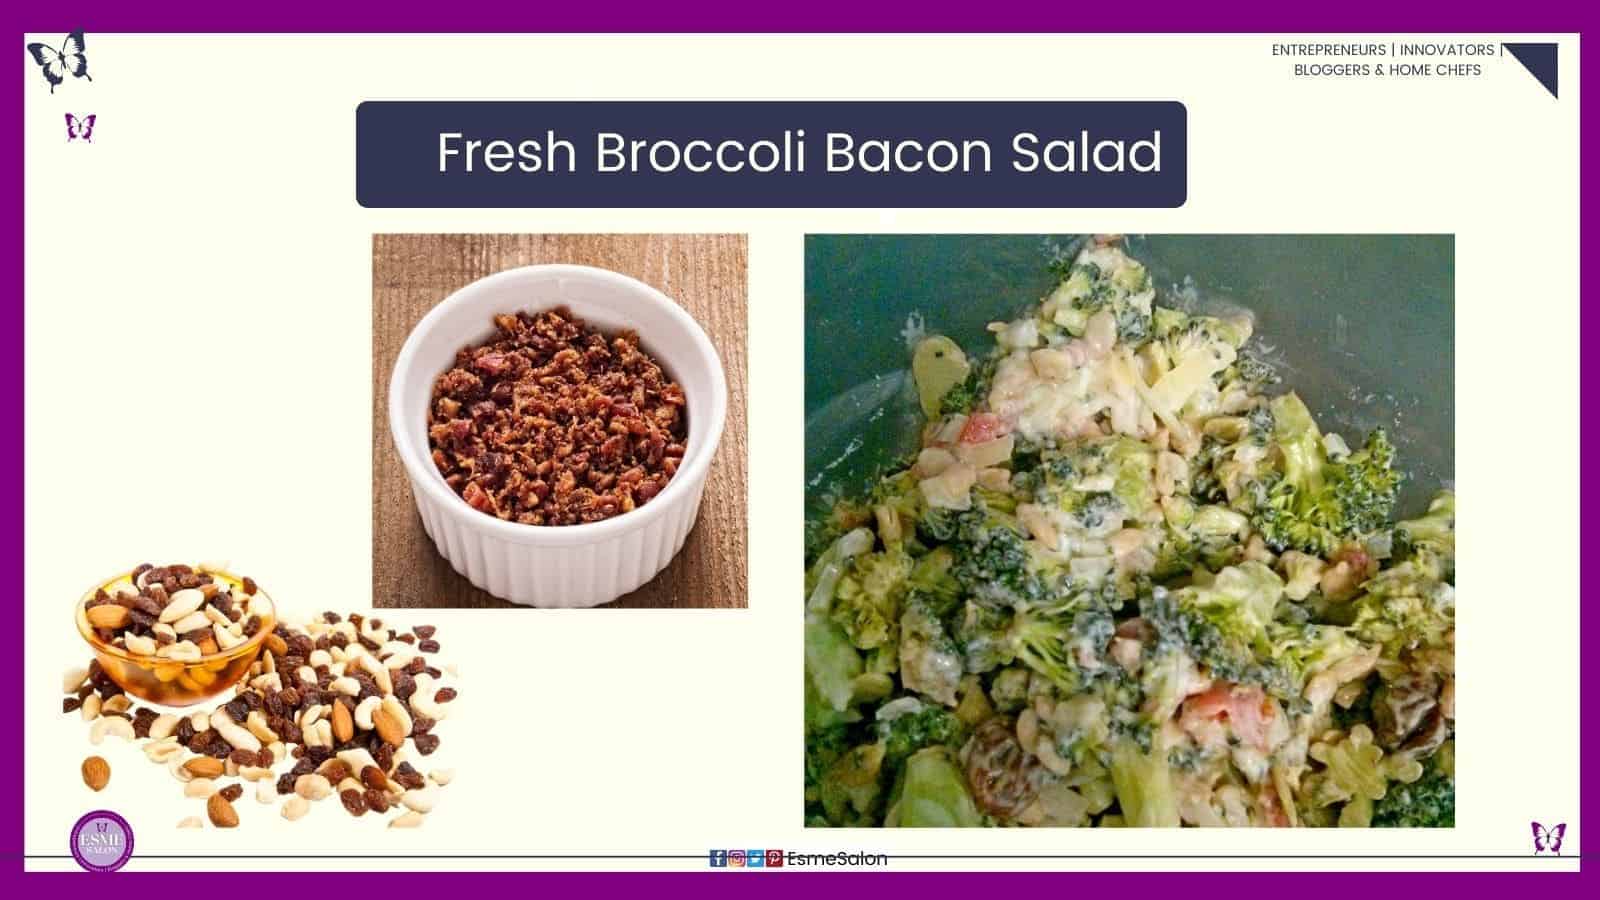 an image of a glass bowl filled with Fresh Green Broccoli and Bacon Salad with raisins and nuts